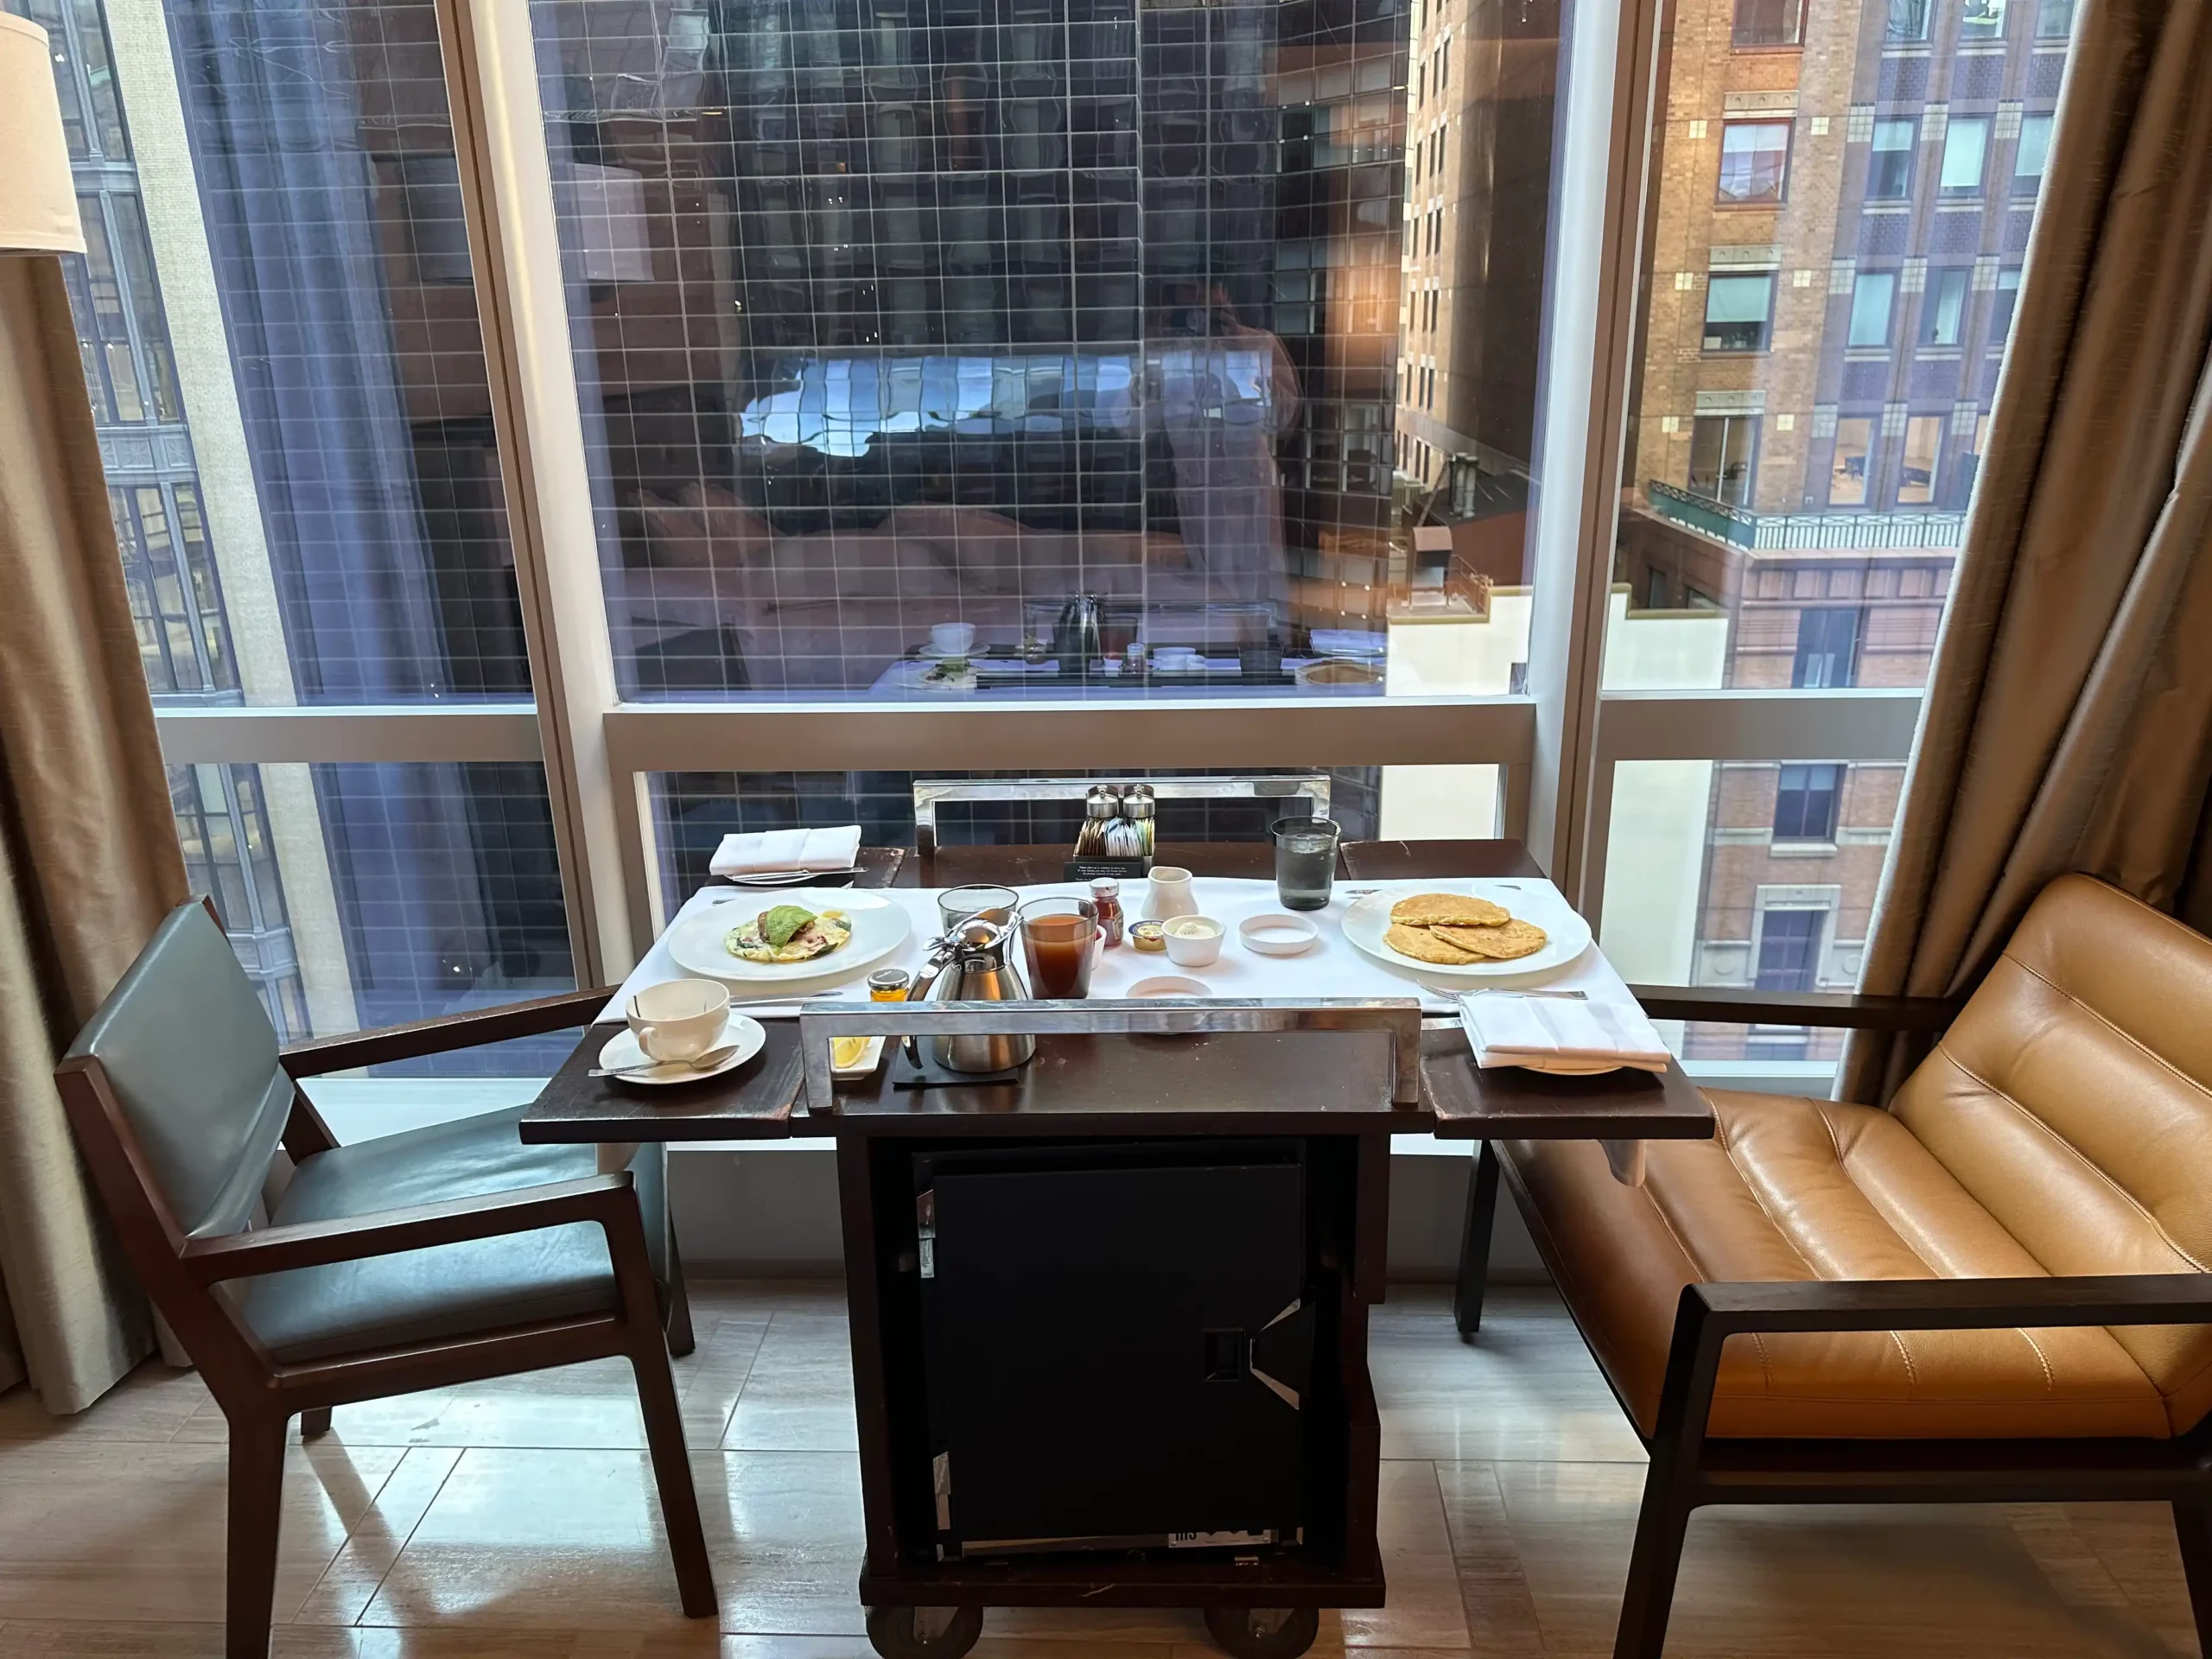 a table with food on it and chairs in front of a window